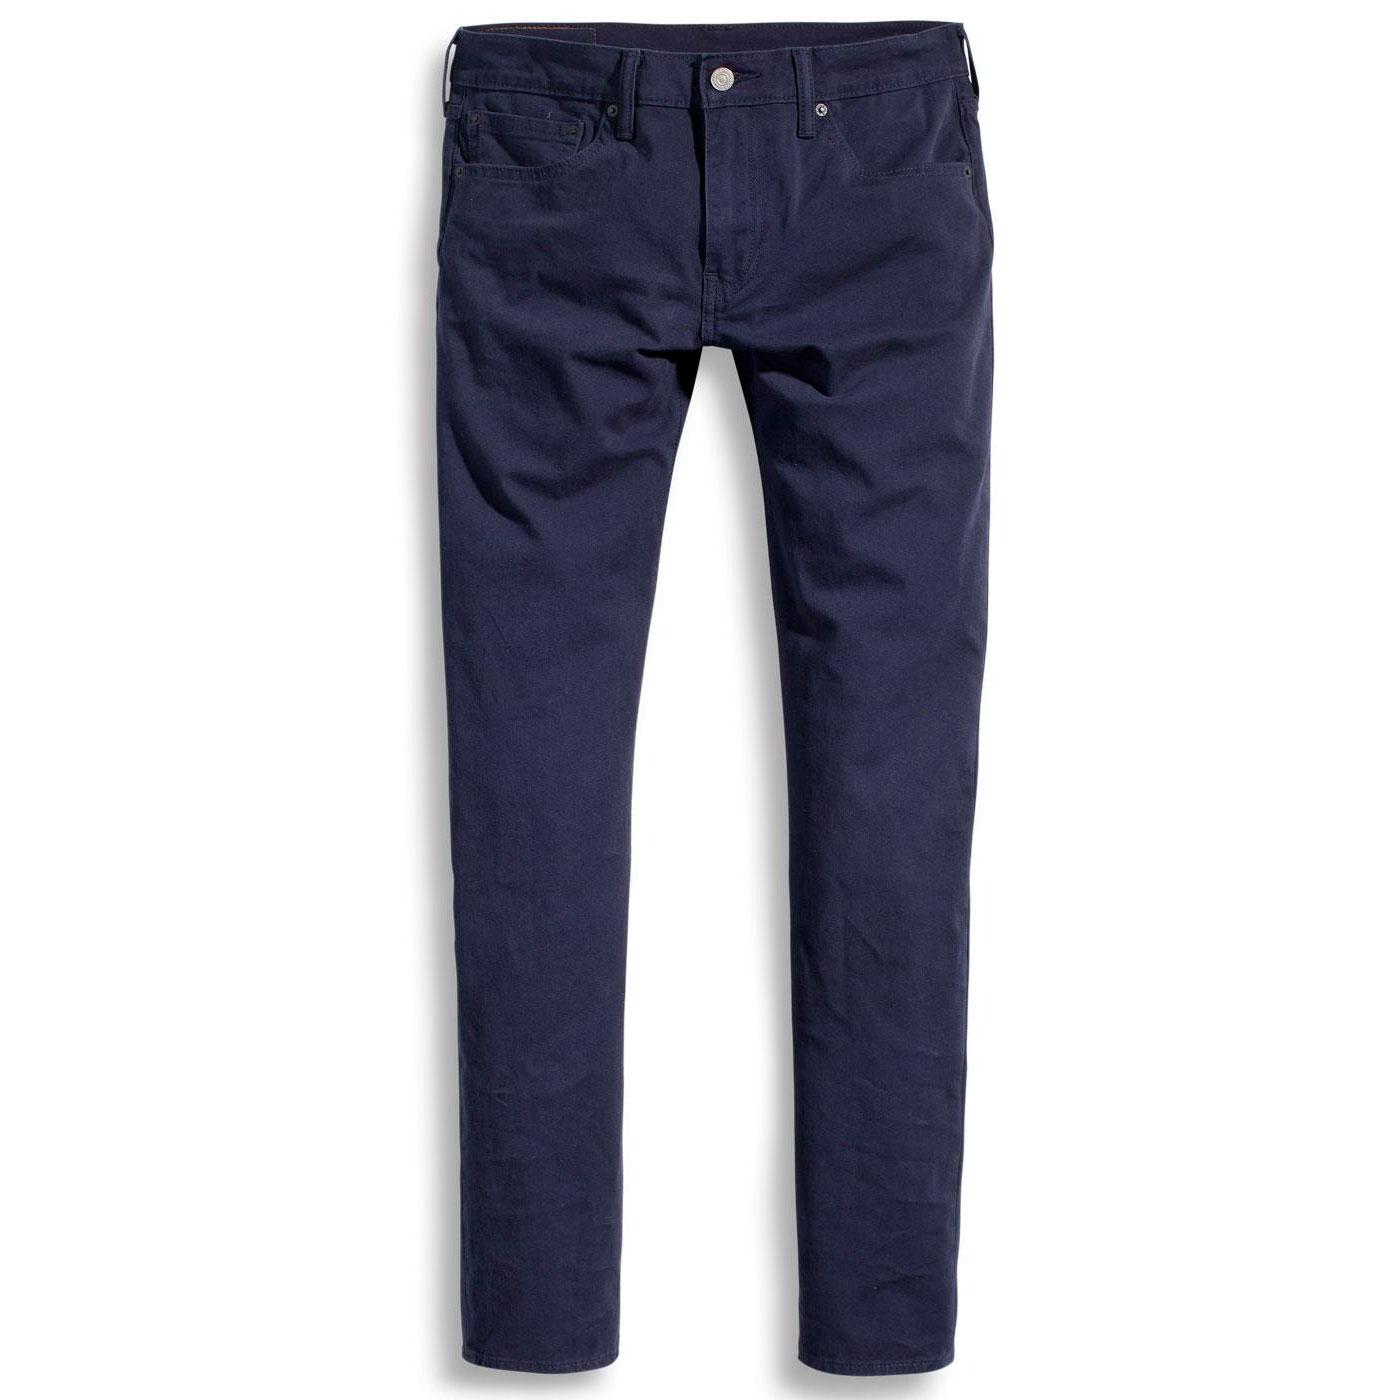 Levis 512 Chinos Discount, SAVE 42% 